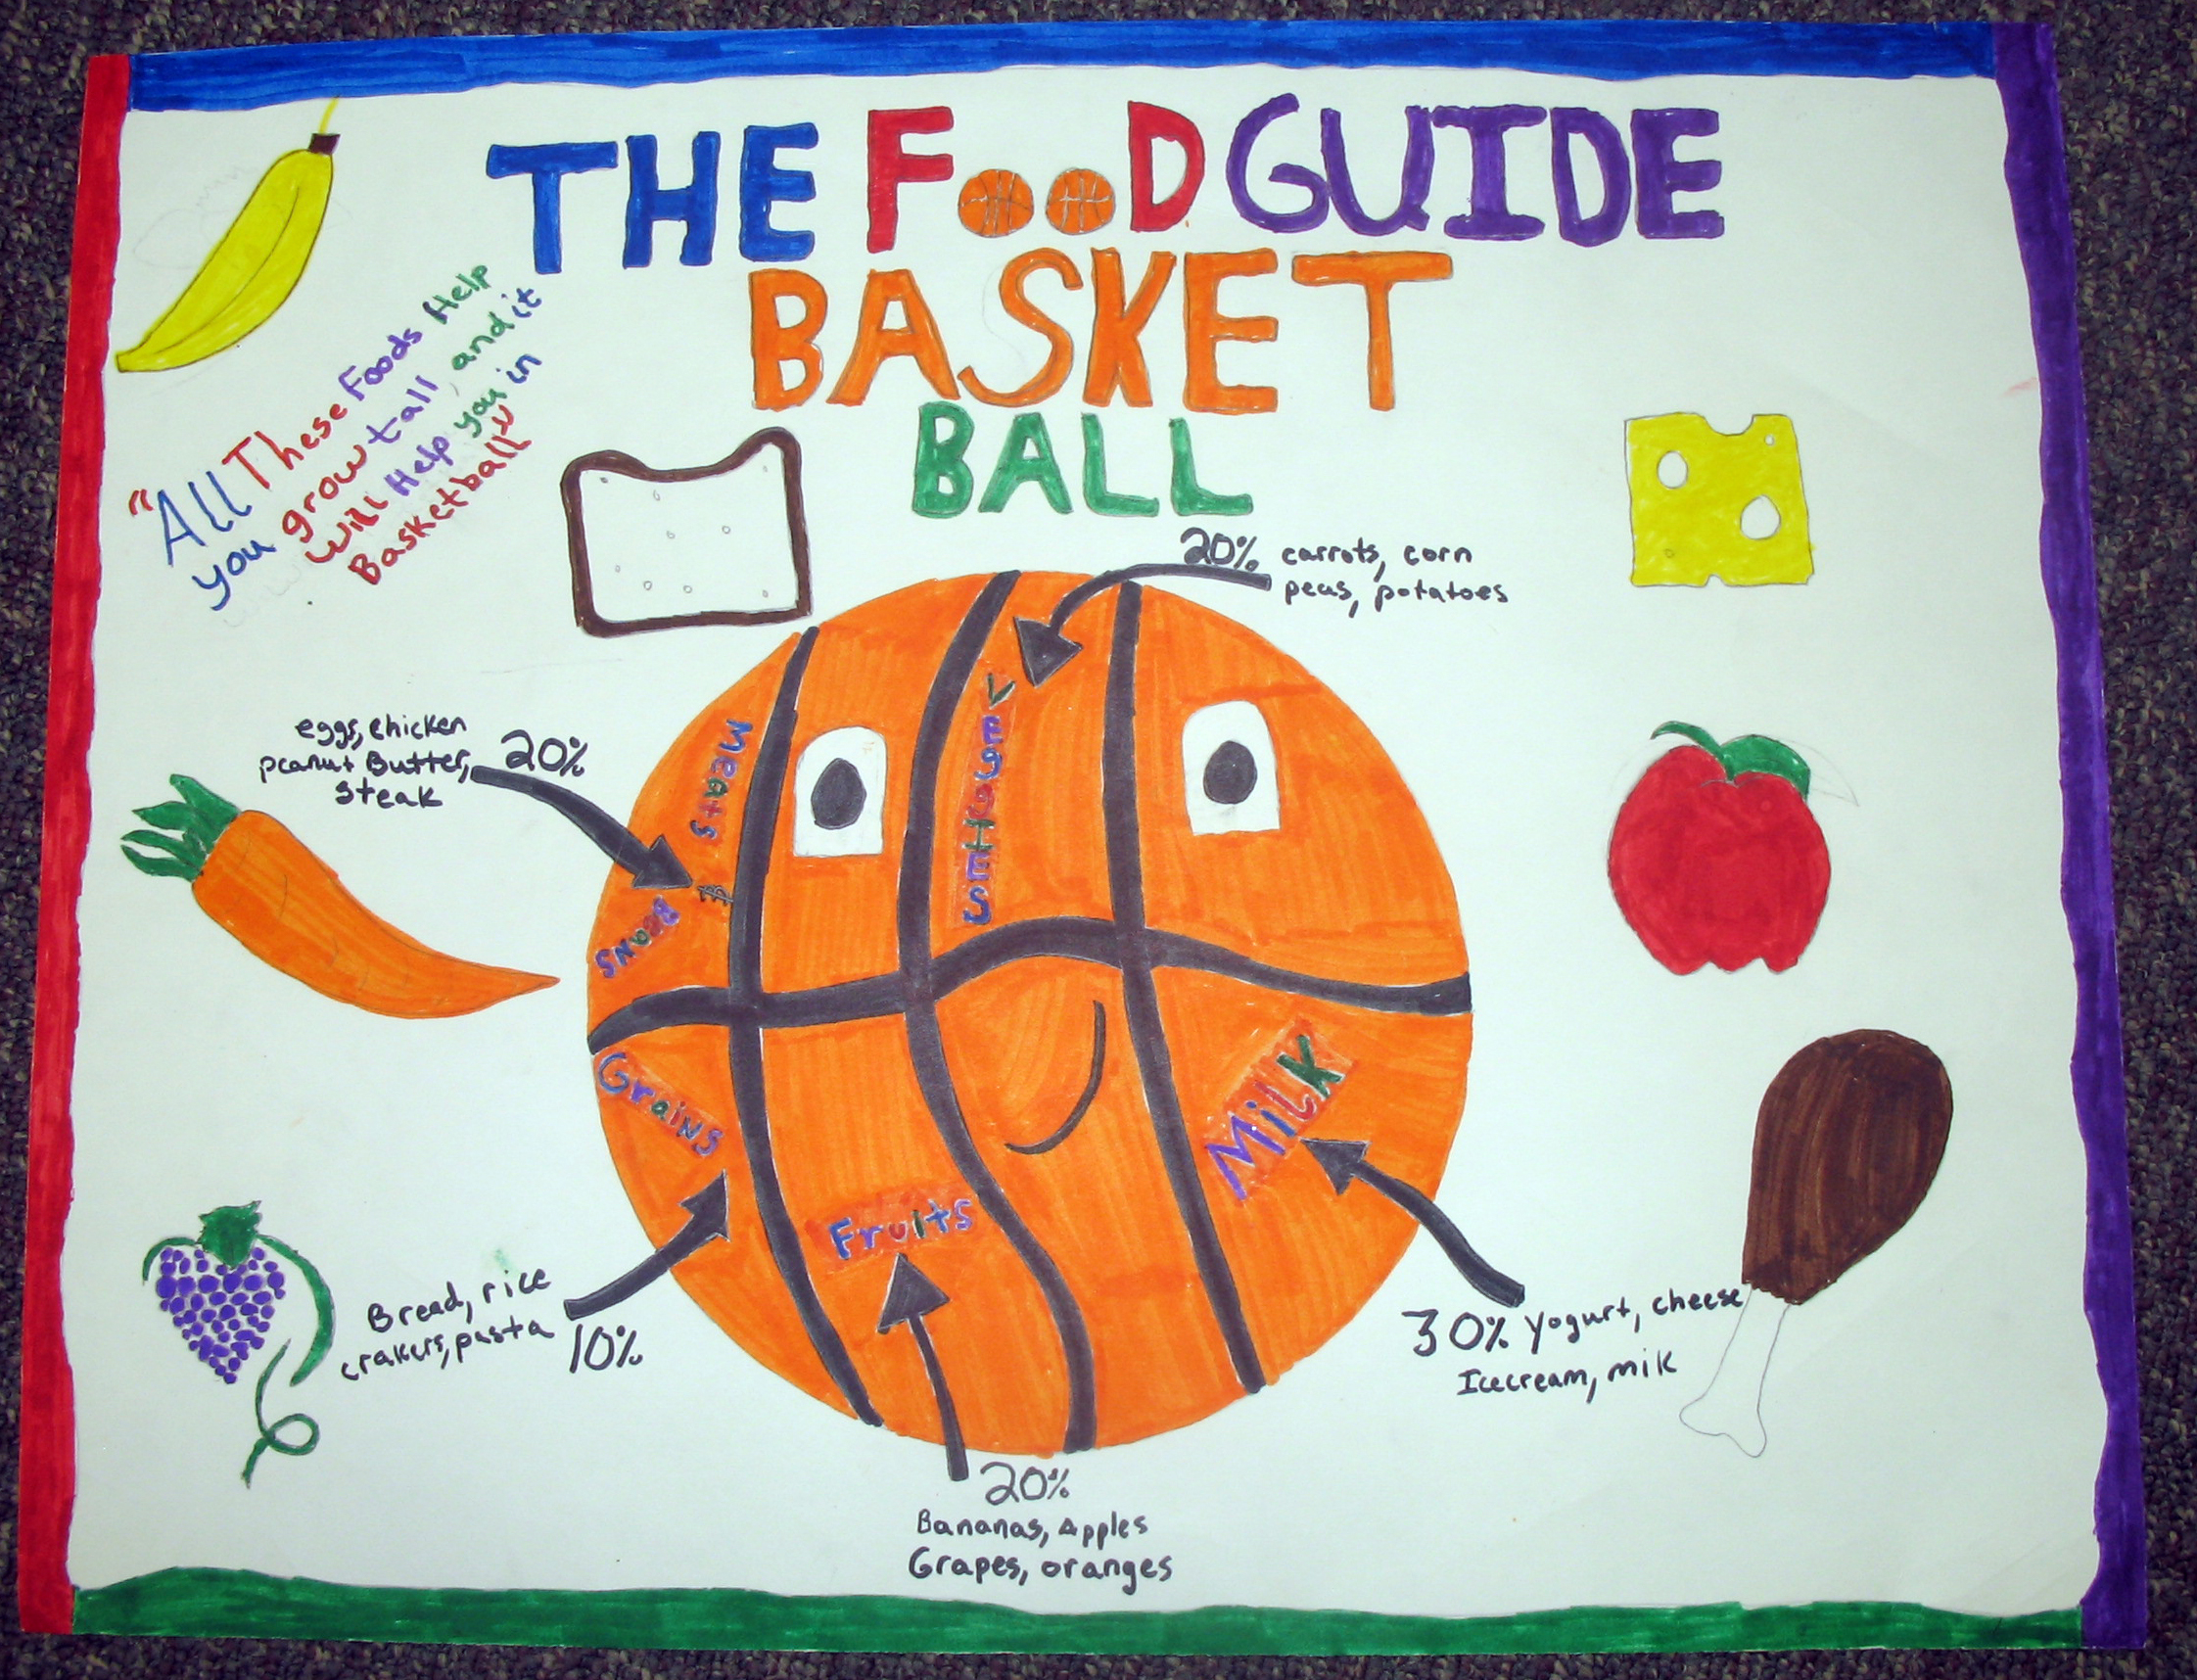 Jalen Finley, a student in the Parshall School District, placed third with this poster in the teen division of the ""Eat Smart. Play Hard."" poster contest.